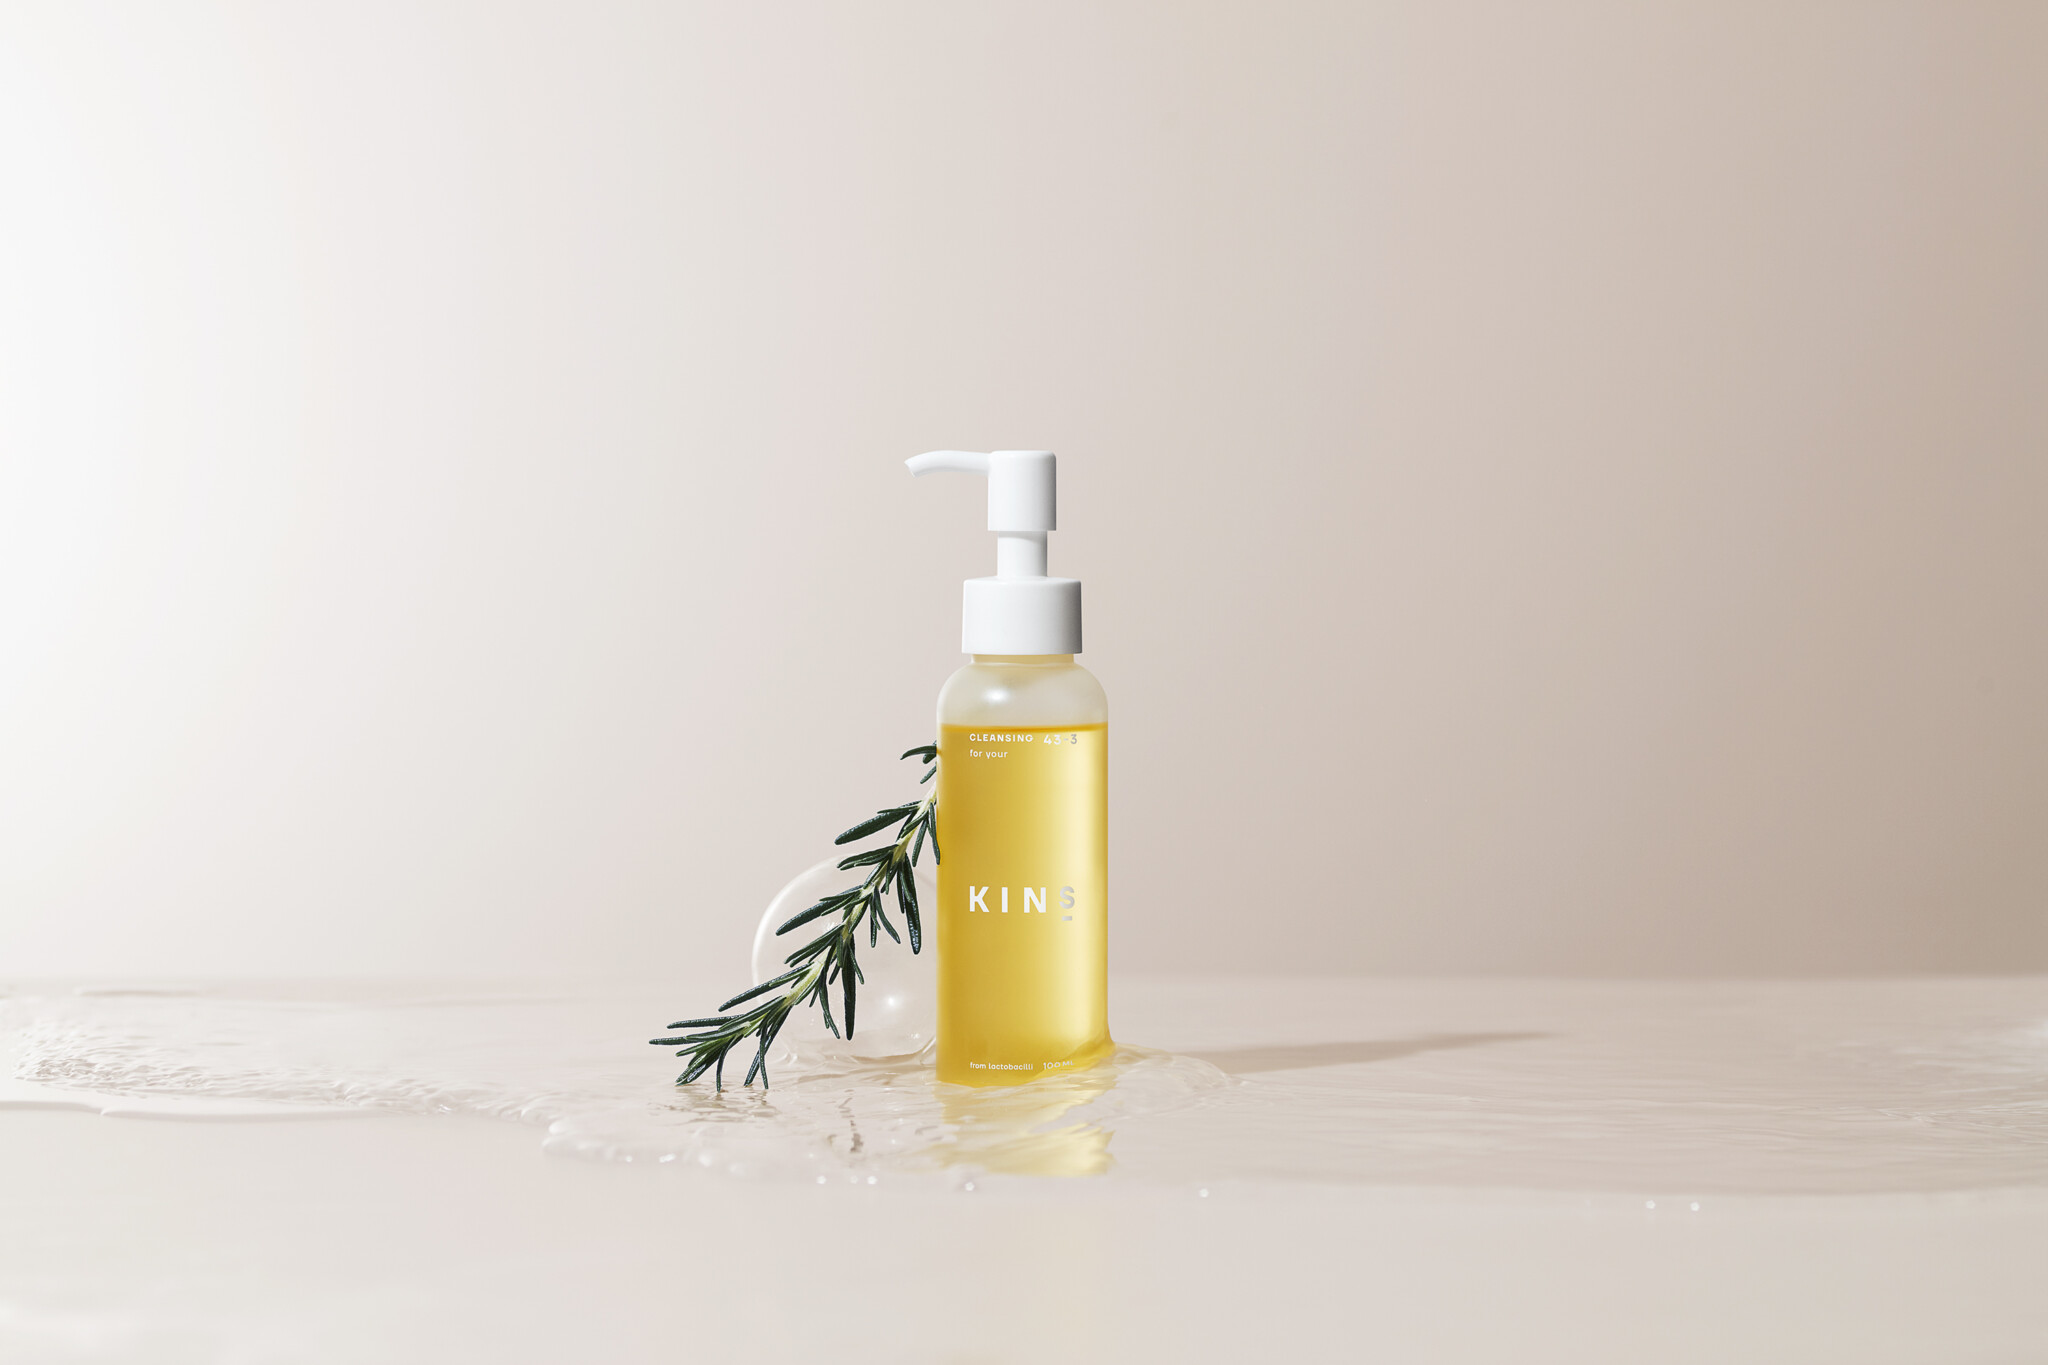 KINS〉から、美肌菌を守る「KINS CLEANSING OIL」が誕生。4月11日 (月